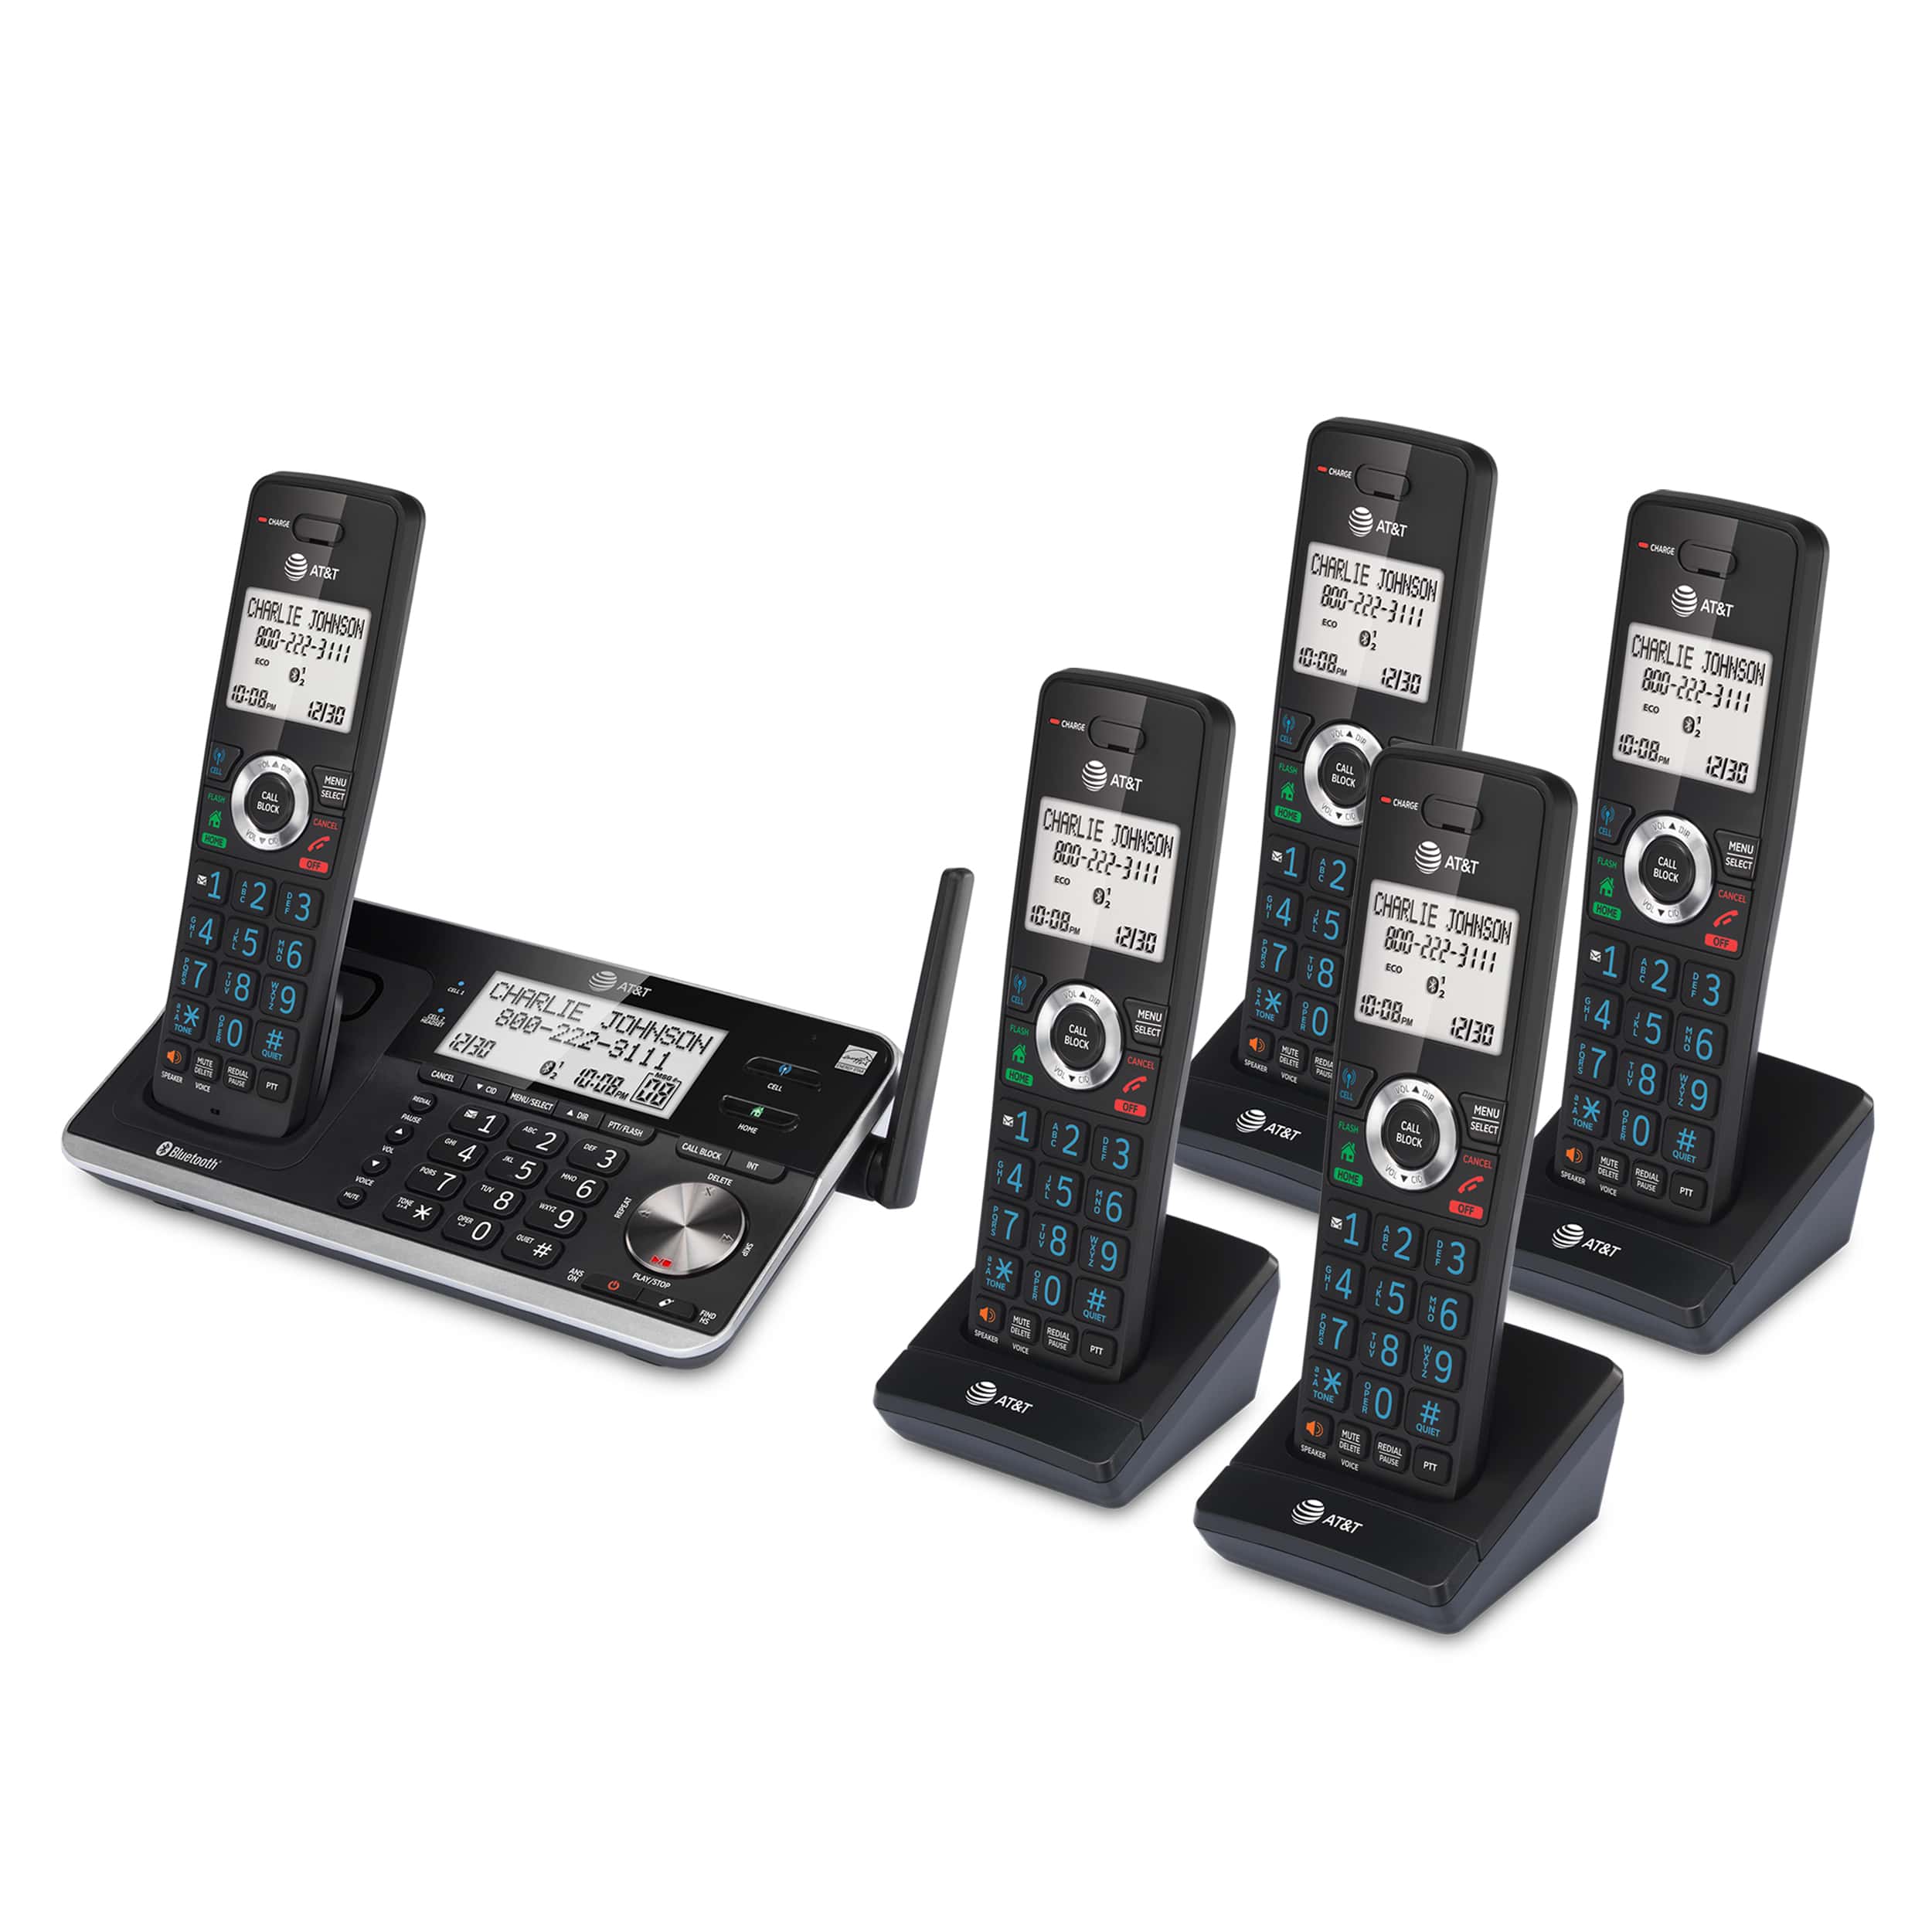 5-Handset Expandable Cordless Phone with Unsurpassed Range, Bluetooth Connect to Cell™, Smart Call Blocker and Answering System, DLP73510 - view 2